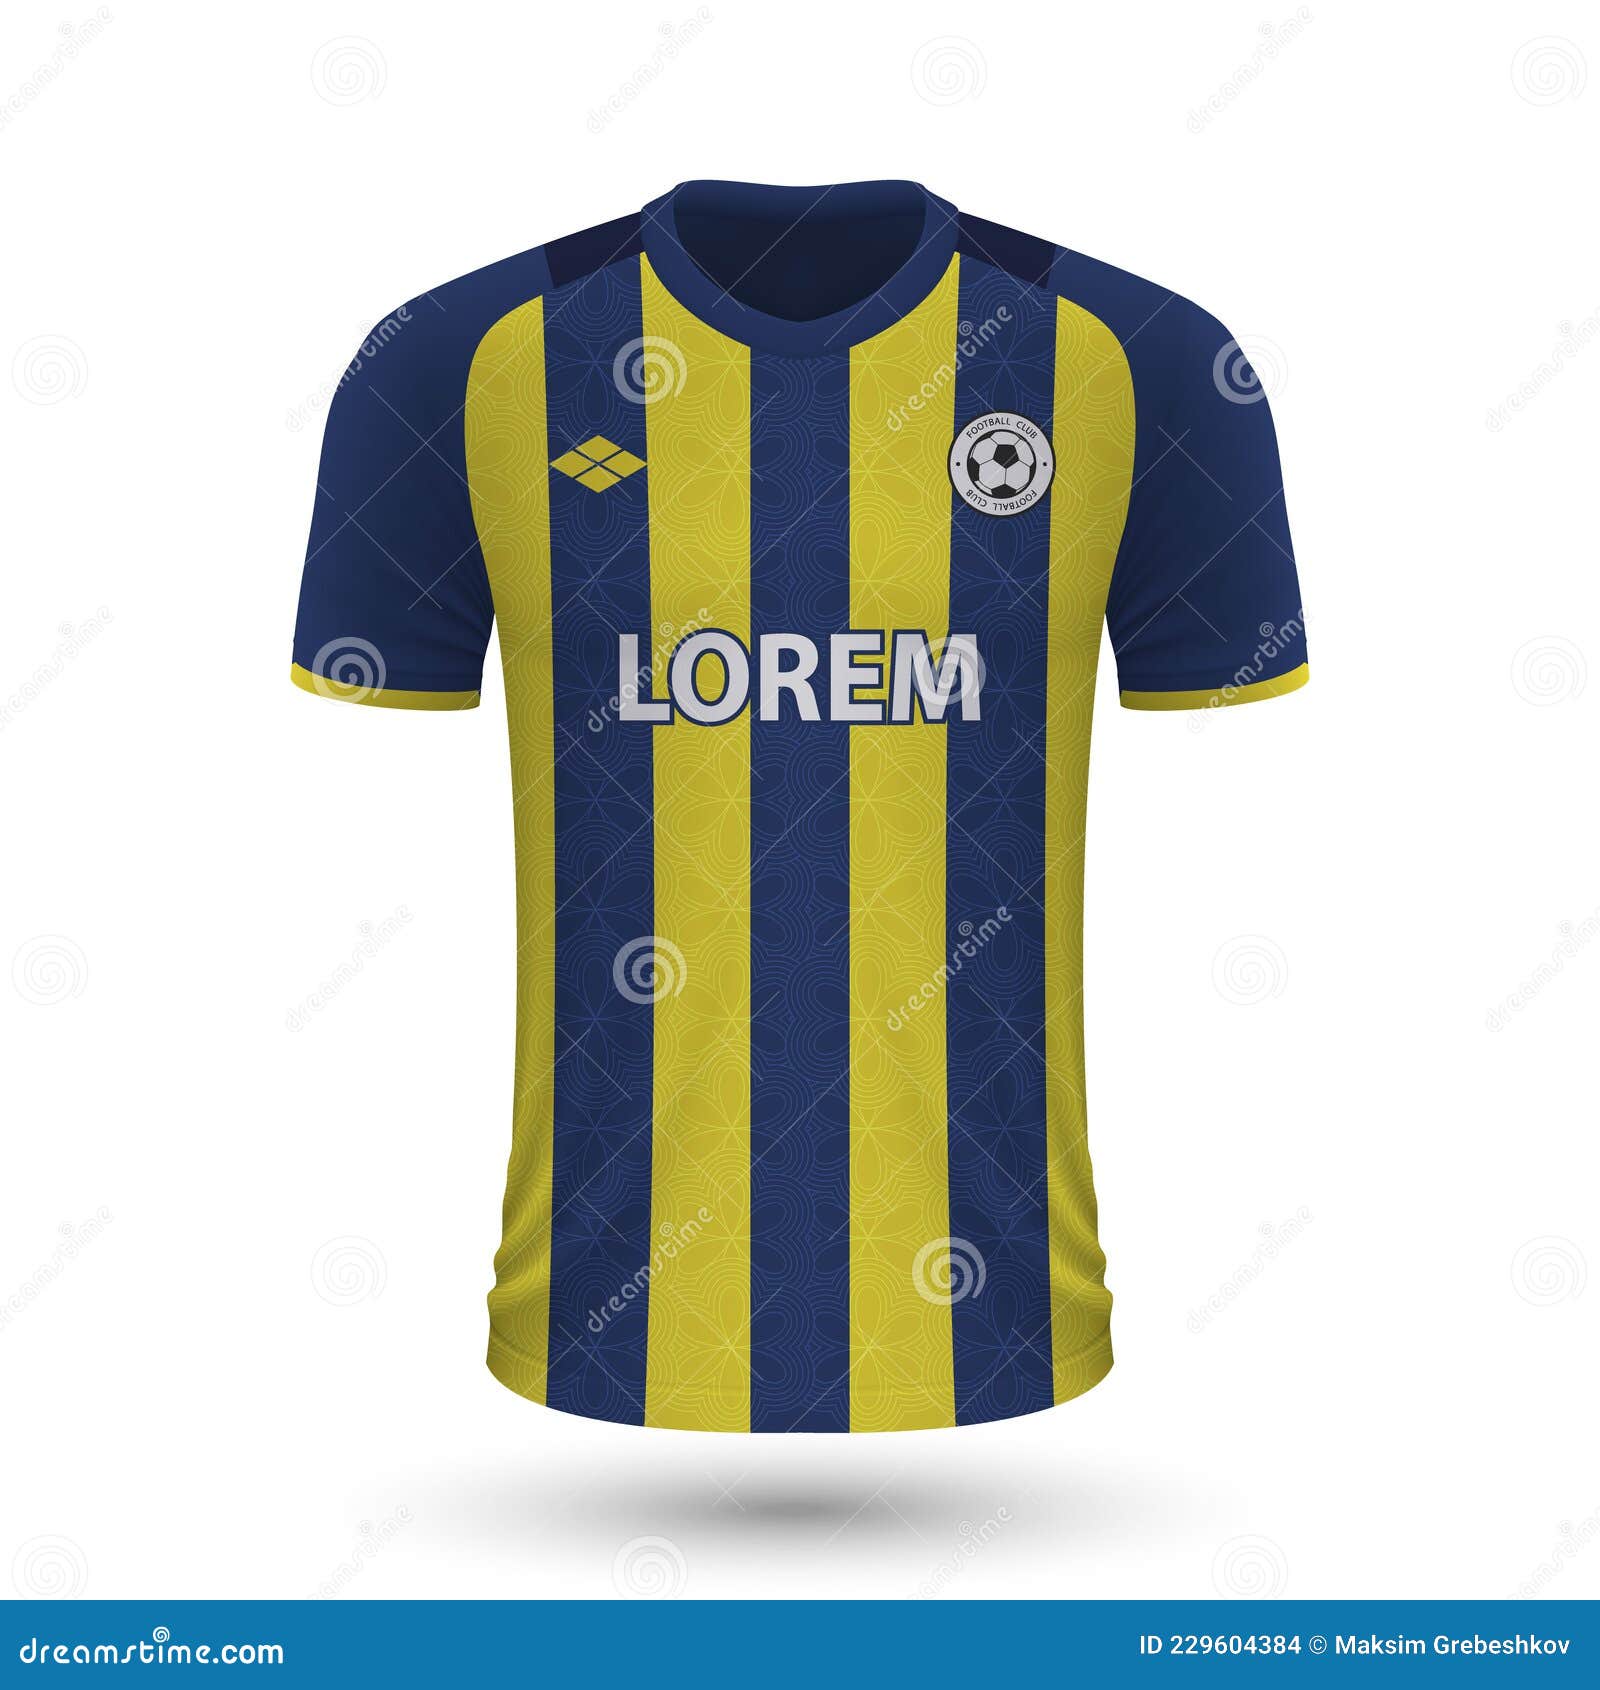 realistic soccer shirt fenerbahce 2022, jersey template for foot